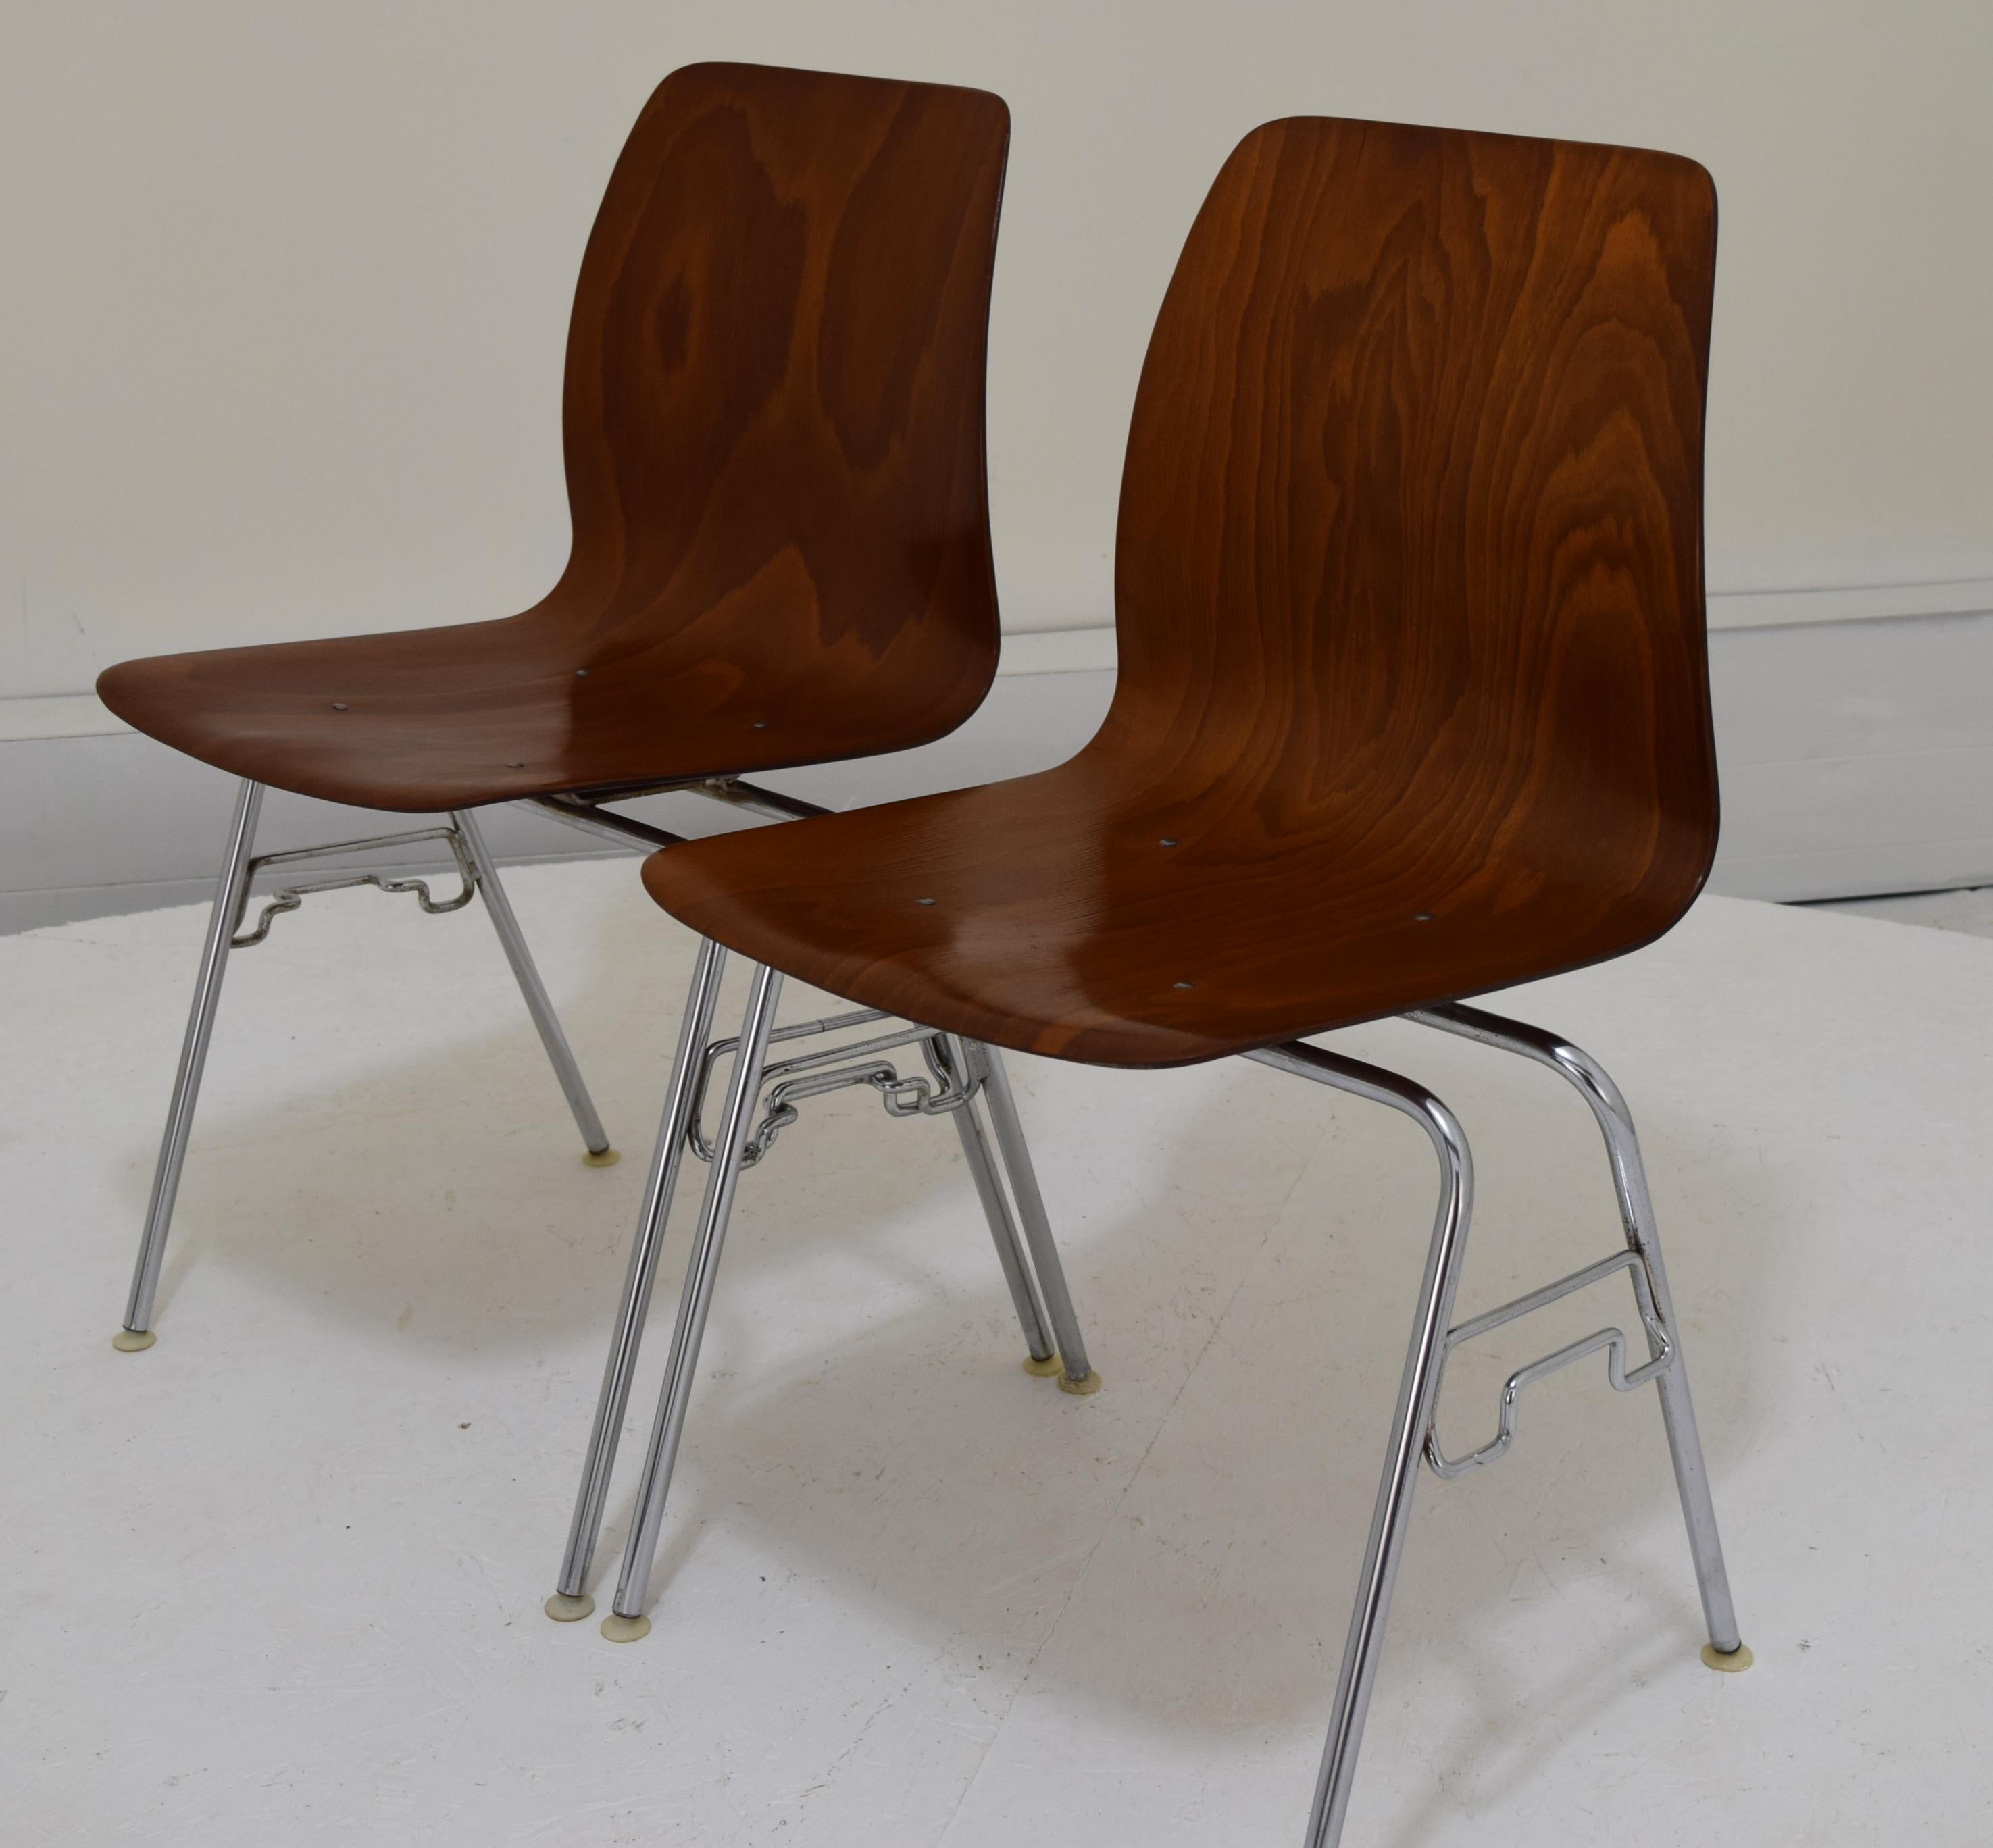 Produced circa late 1960s, early 1970s, these chairs are an uncommon model to find here in the United States. We have this listing for 12, and another listing for 6 darker toned models. The shells are 16